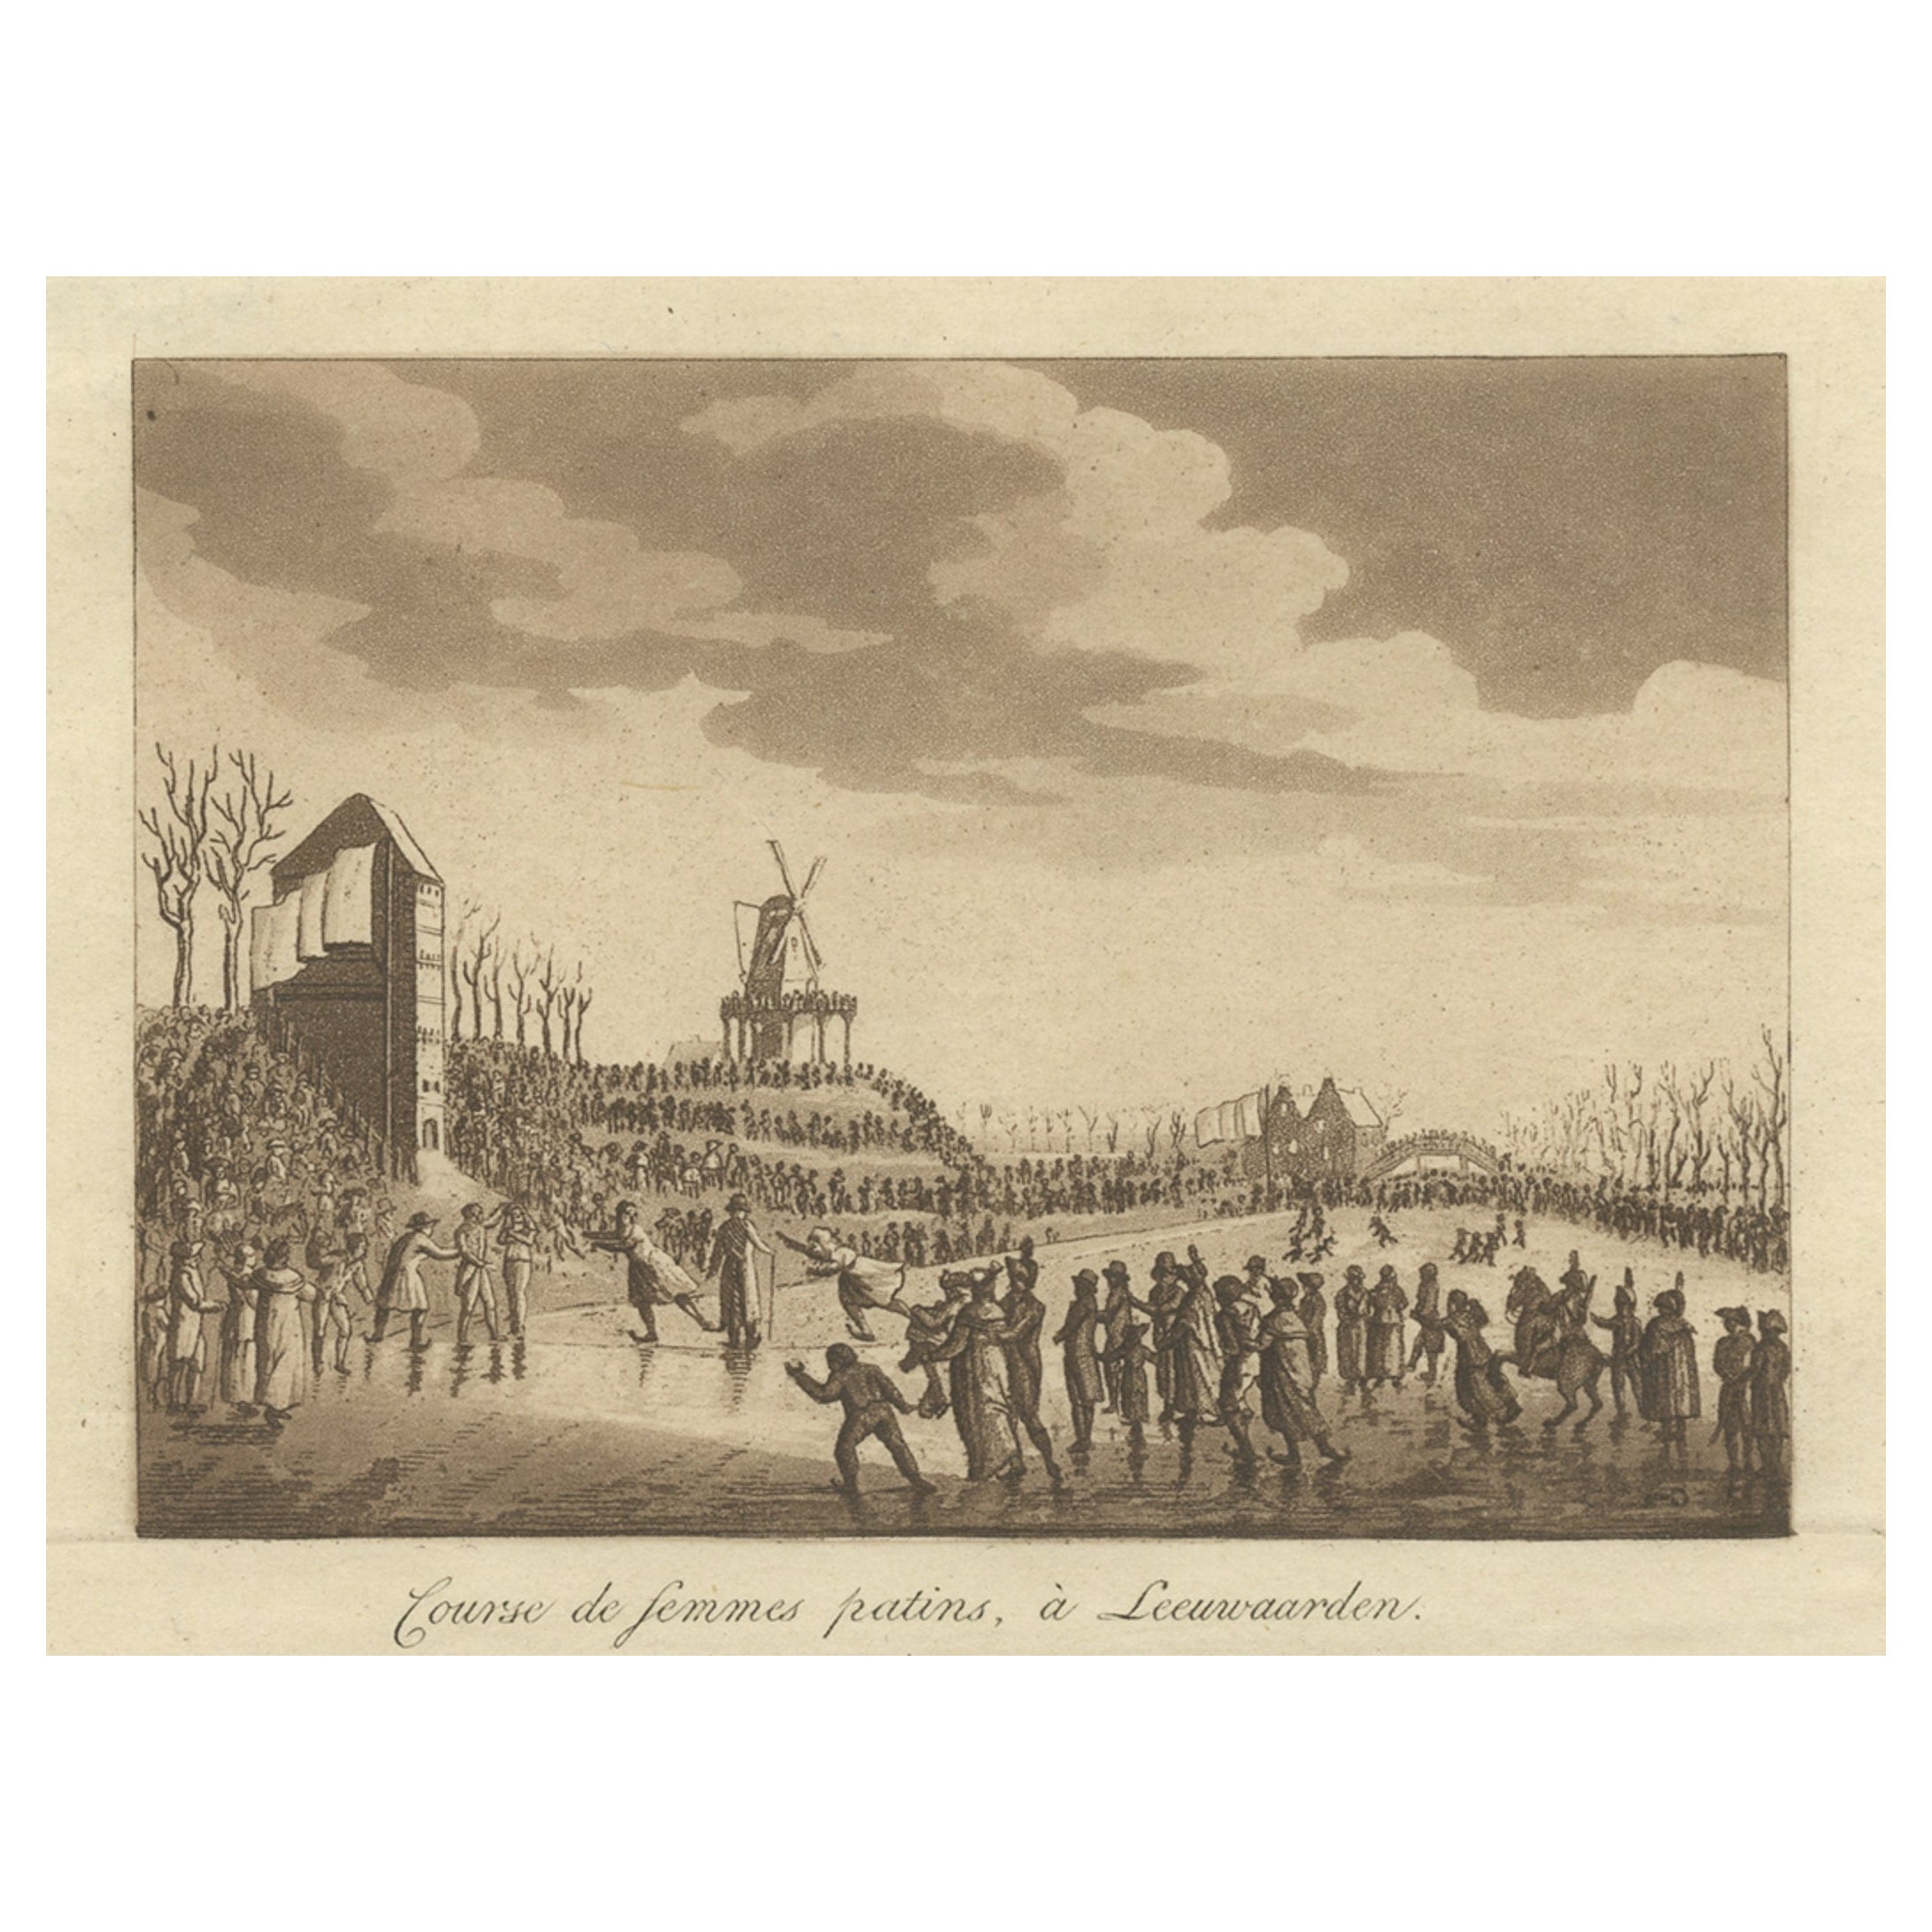 Rare Print of Ice Skating in Leeuwarden, Capital of Friesland, The Netherlands For Sale